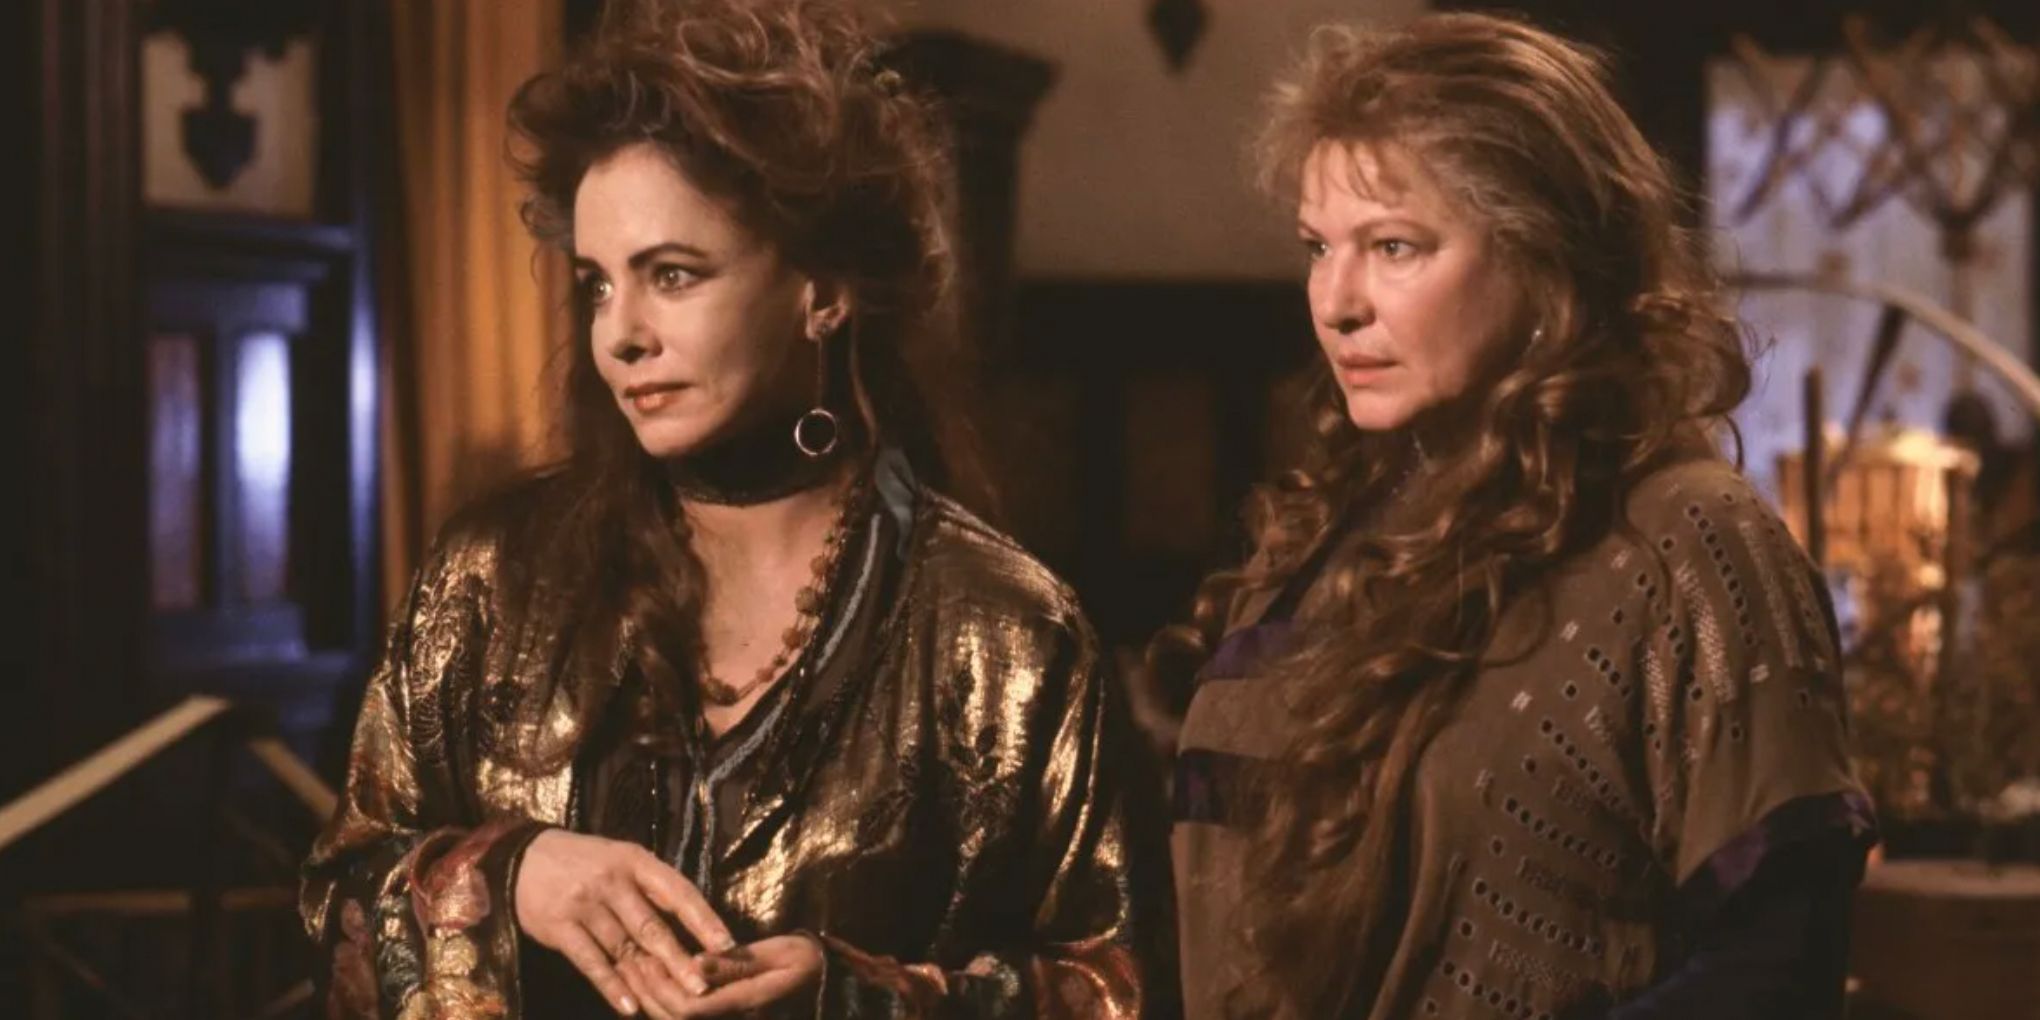 The aunts standing together and appearing concerned in Practical Magic